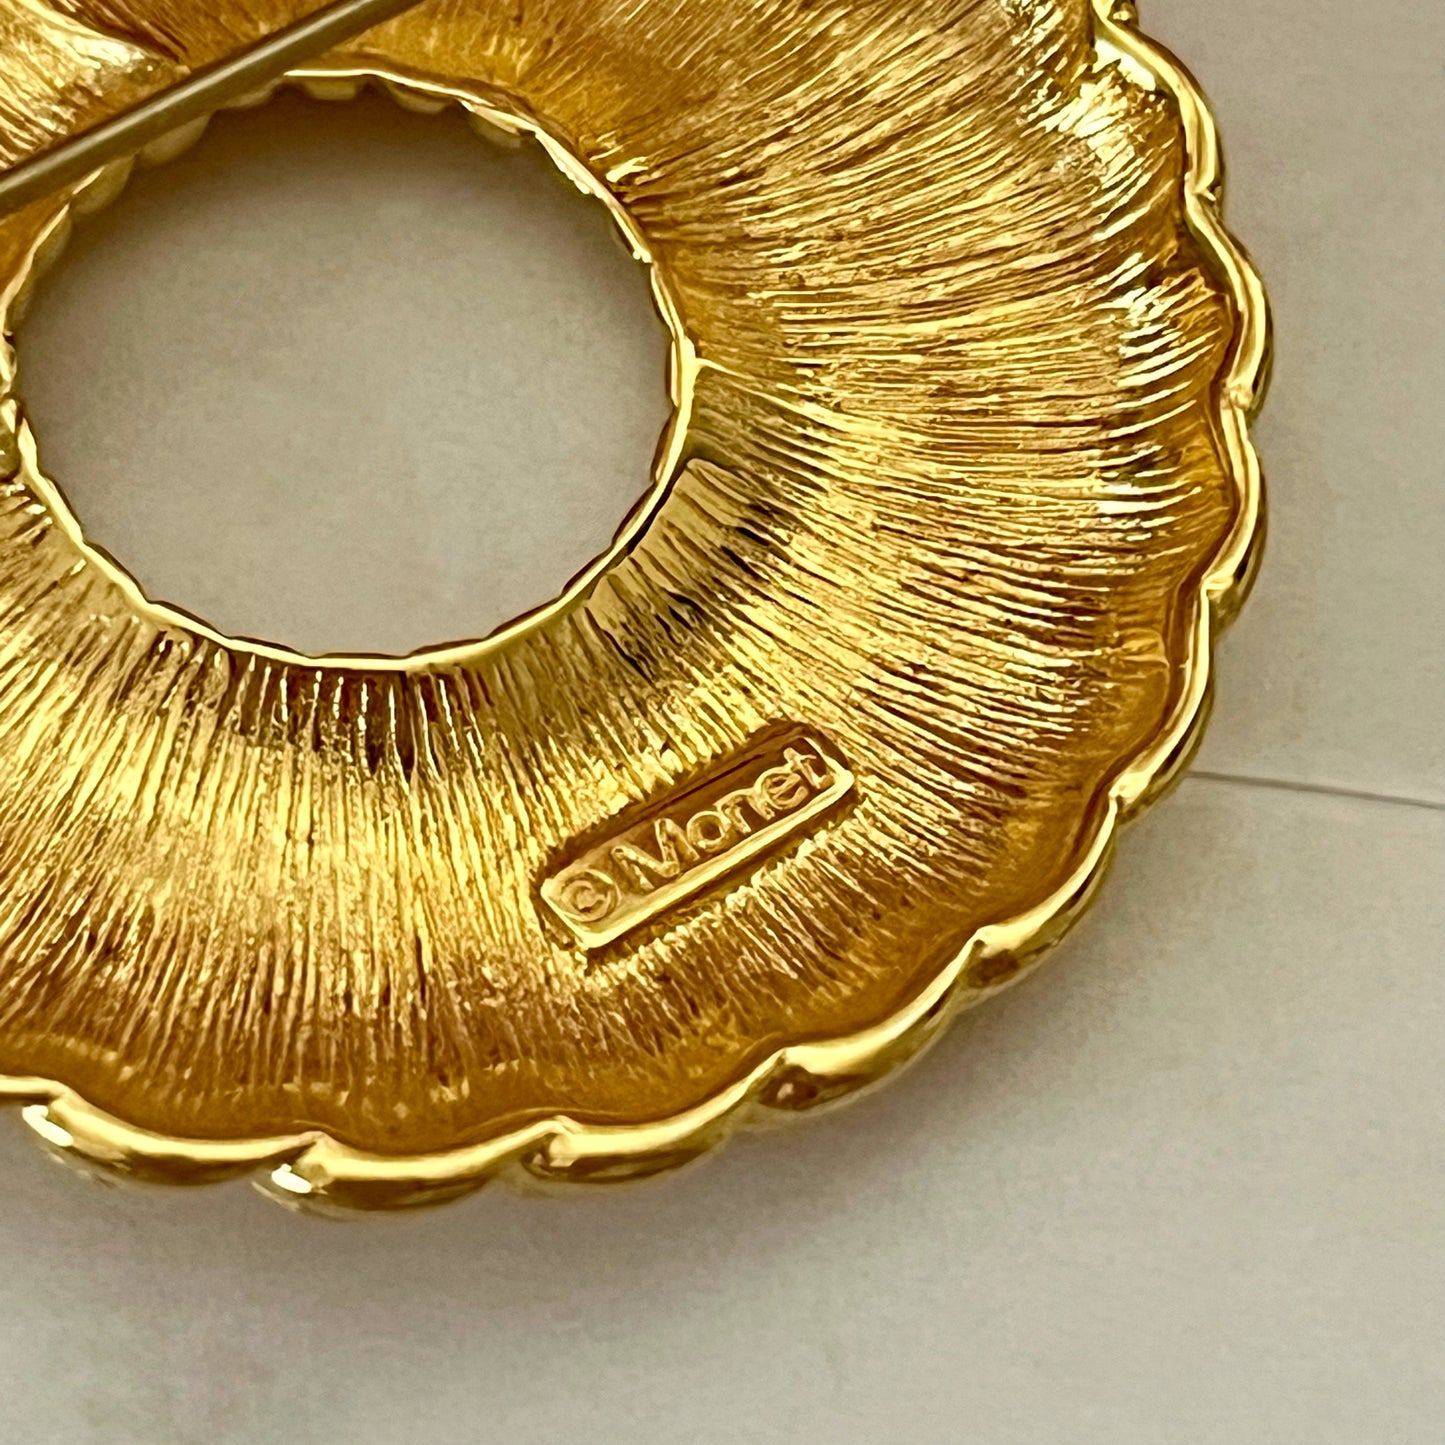 1980s Monet Gold Plated Circle Brooch